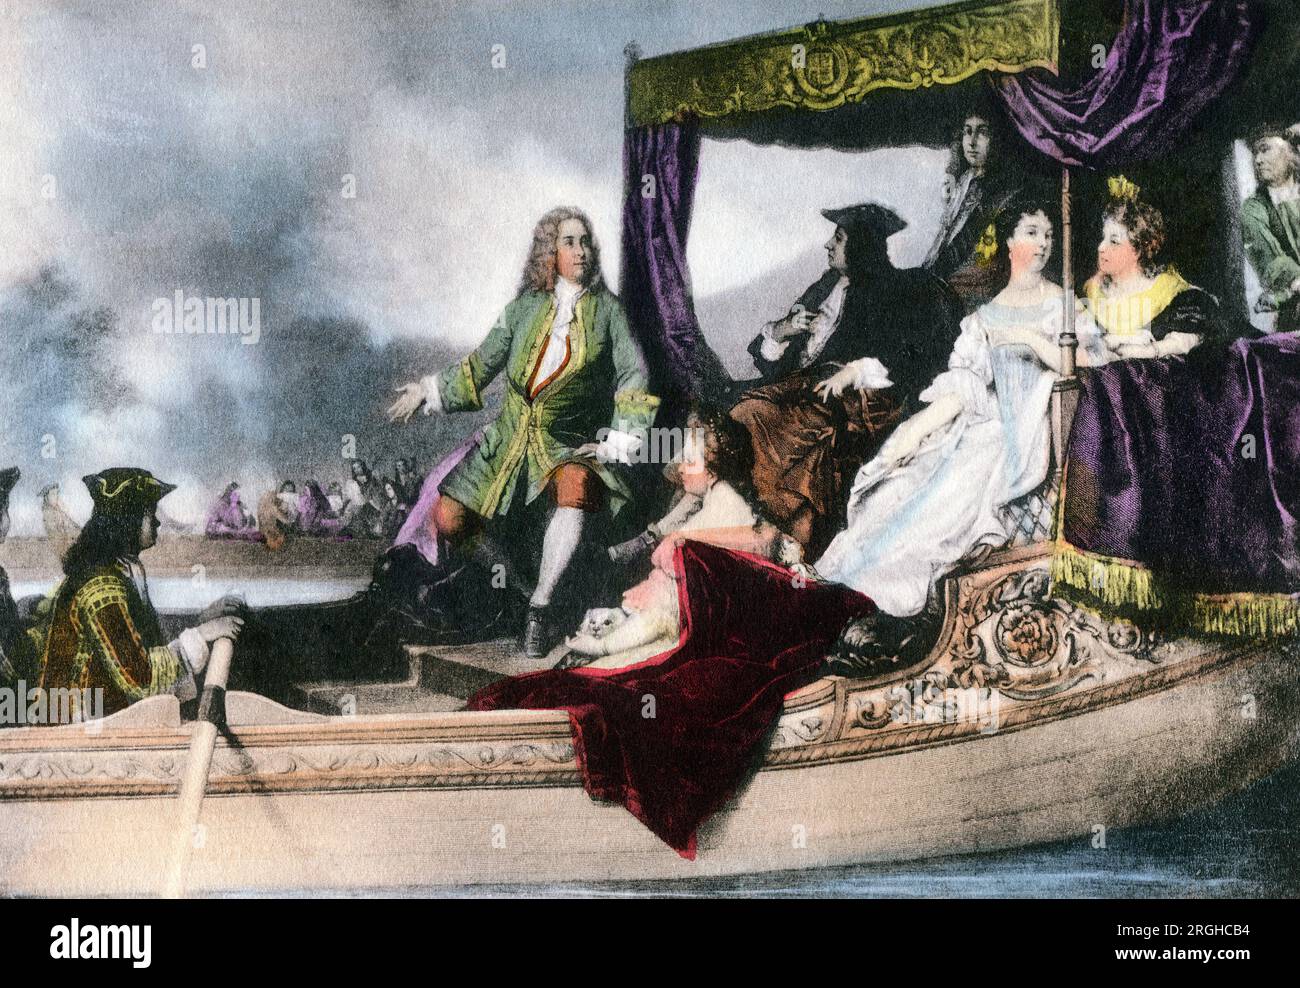 George I of Great Britain and Composer George Handel on Riverboat during Water Festival, River Thames, London, England, UK, 1715, Color Illustration, Unidentified Artist Stock Photo